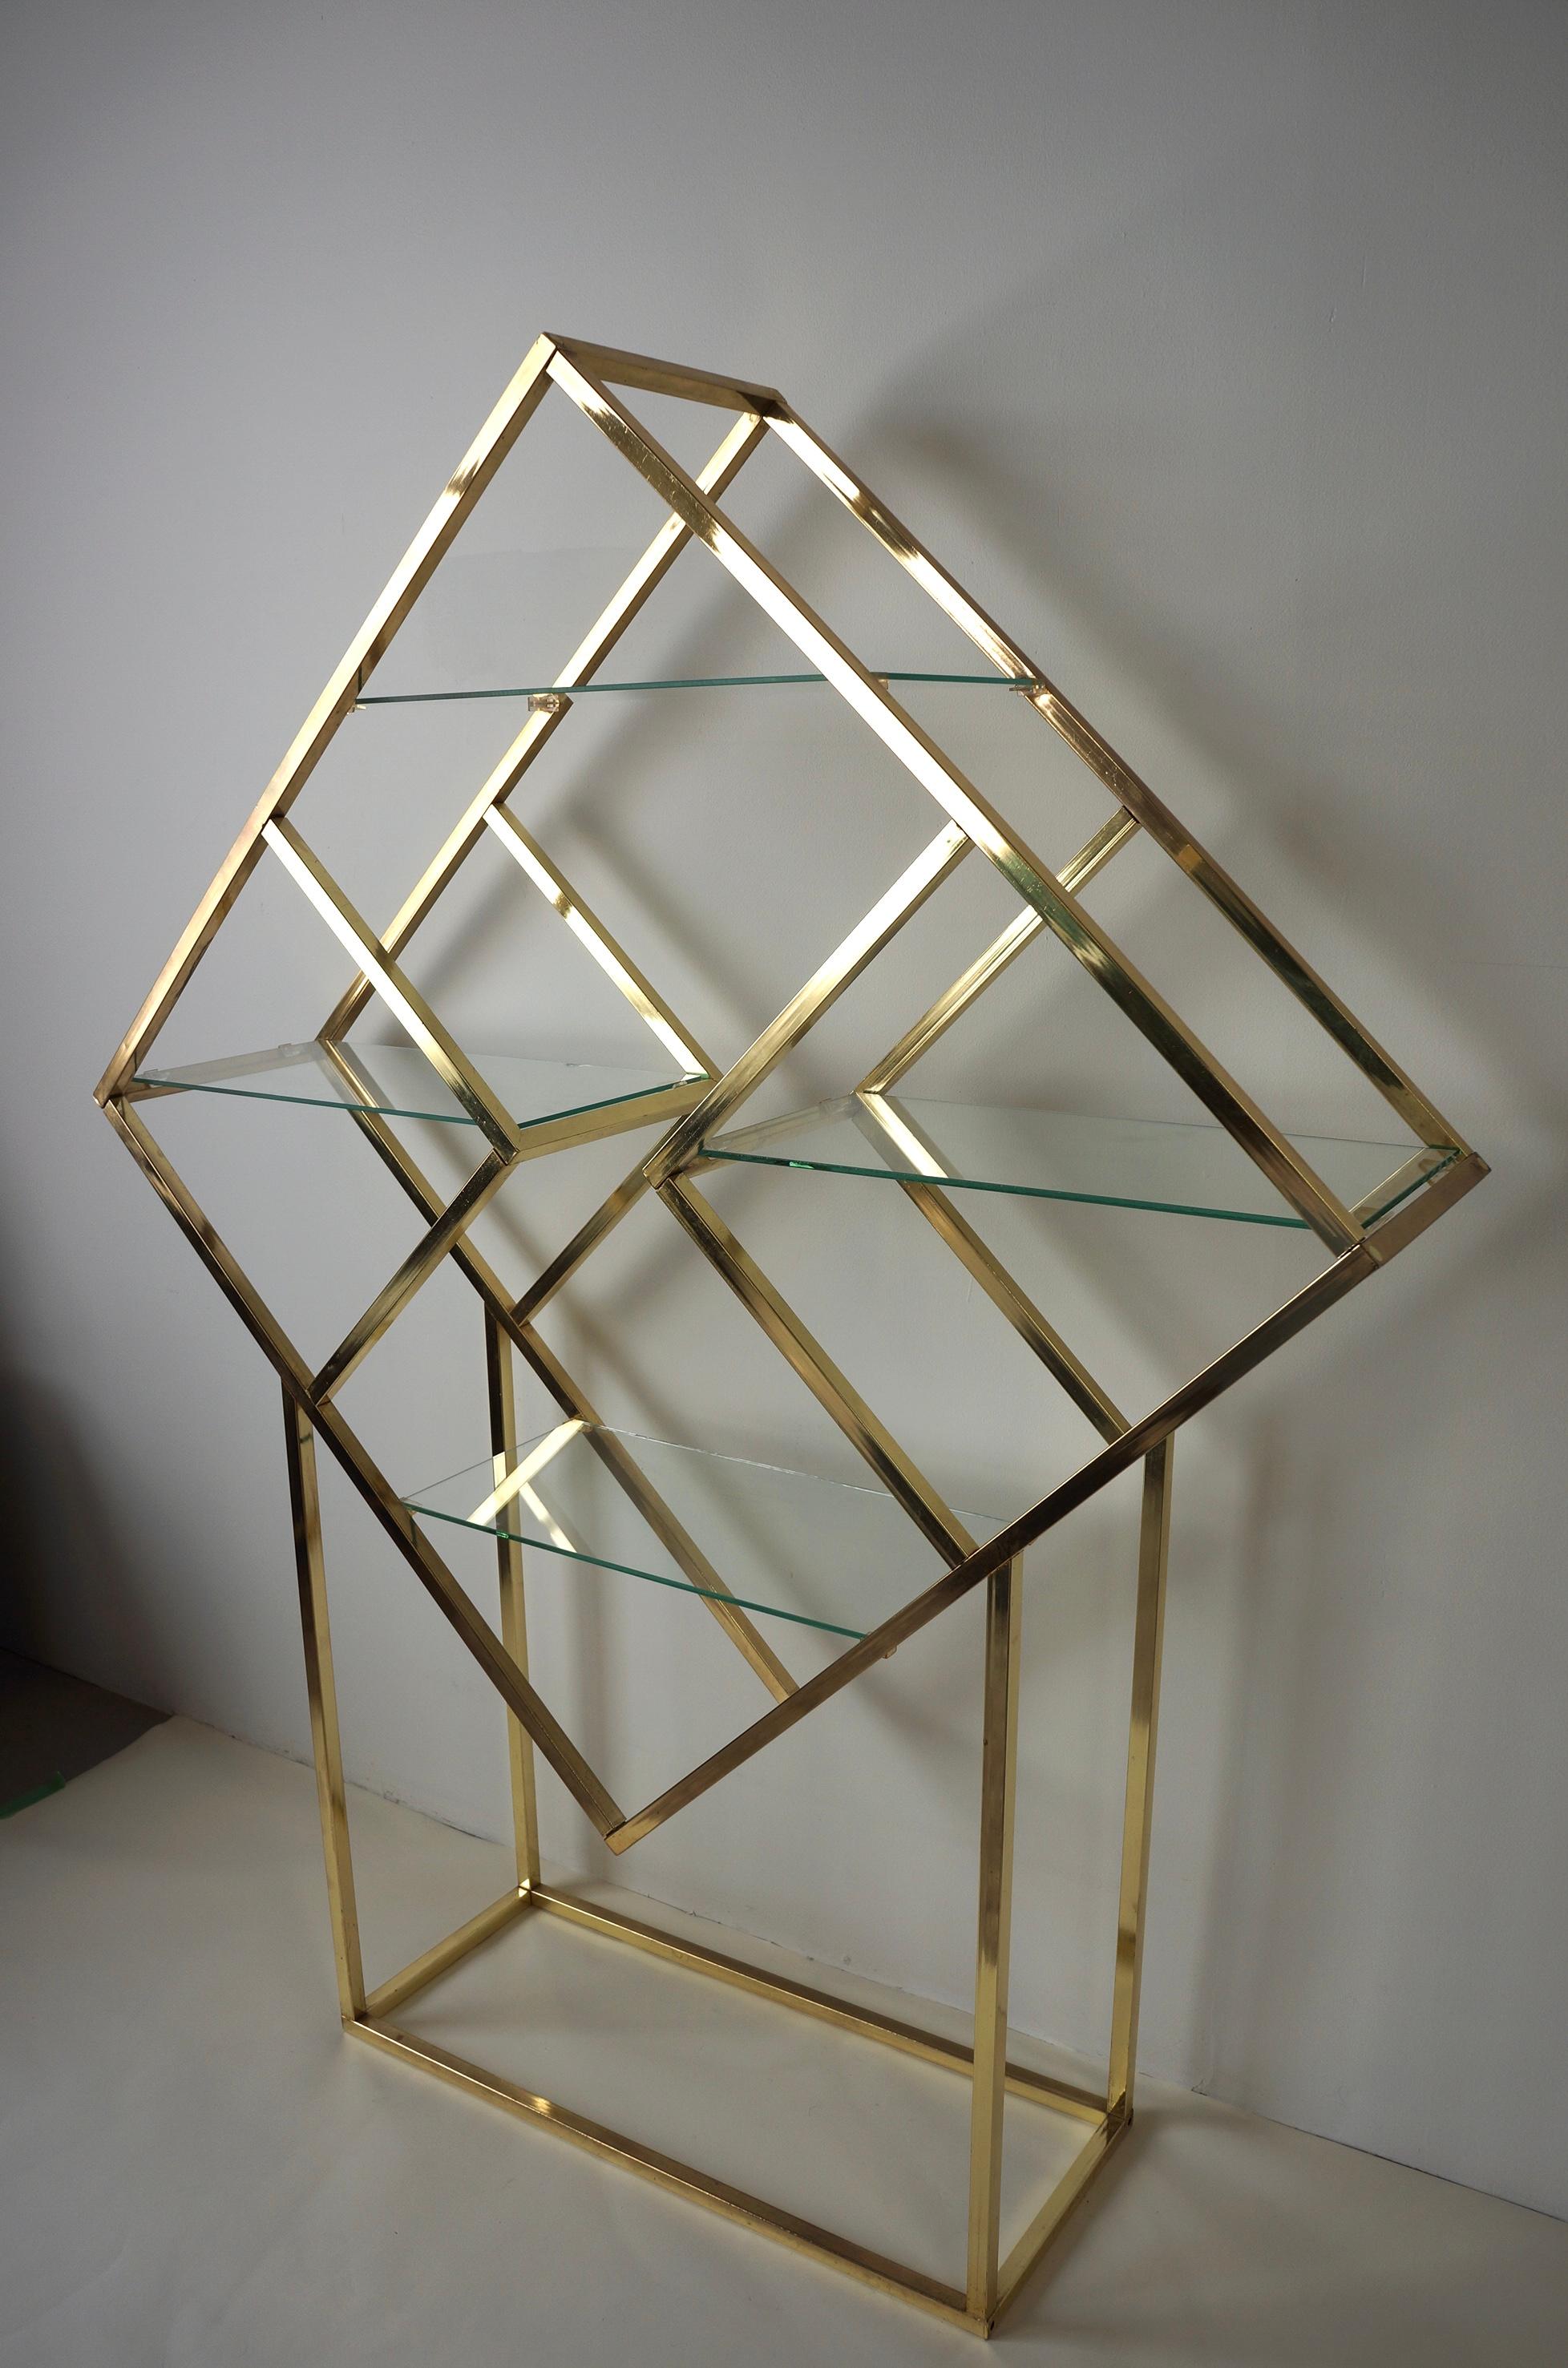 Diamond shaped Hollywood regency style brass plated shelf. It features 4 glass shelves that look like they’re floating. This timeless brass shelf would look gorgeous in any space as it’s a timeless piece.